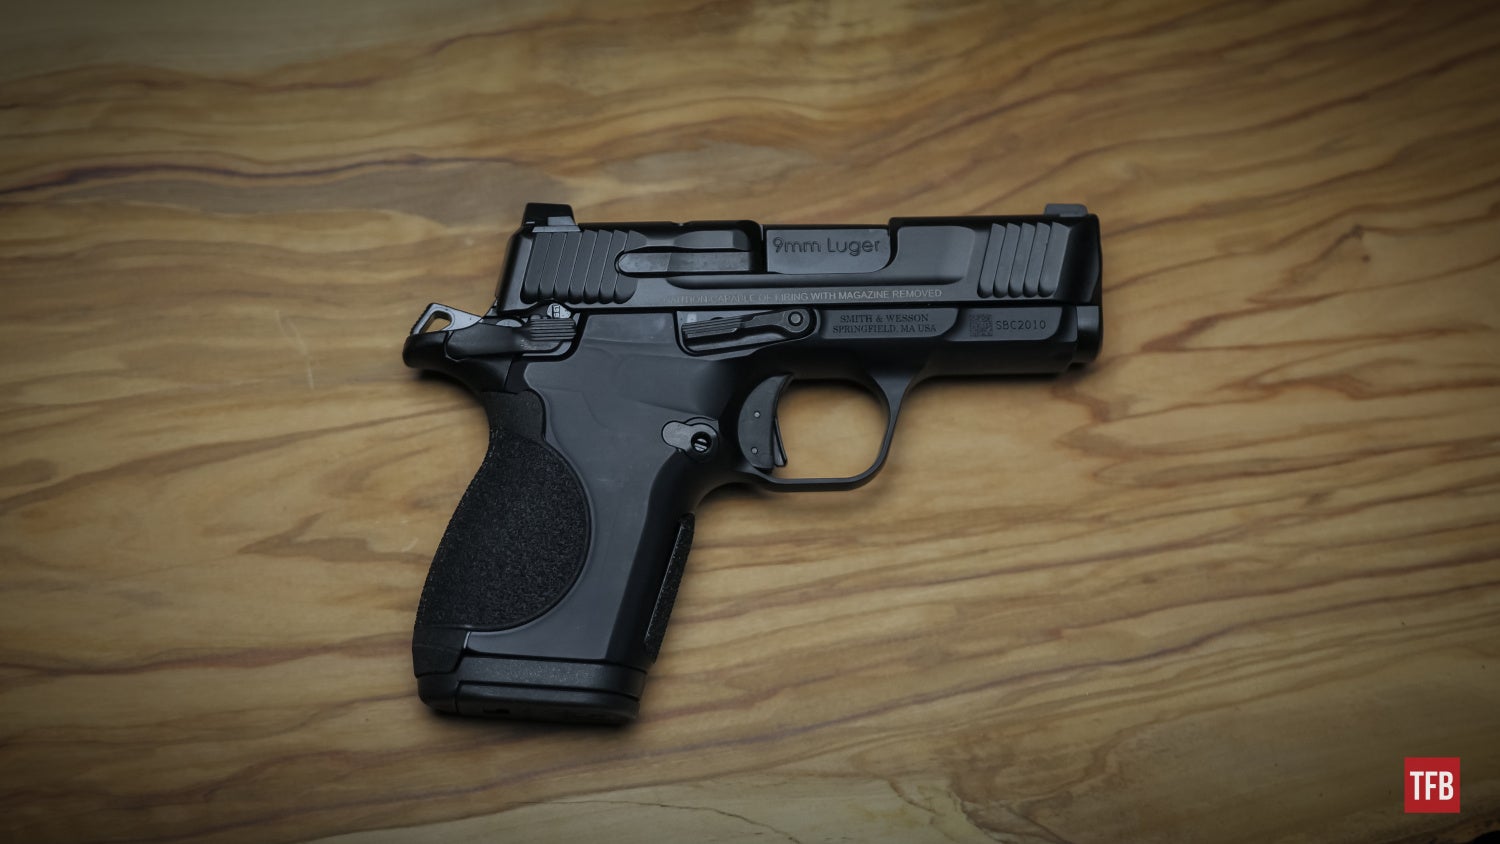 FIRST SHOTS: The Sexy Smith & Wesson CSX Micro-Compact 9mm Pistol